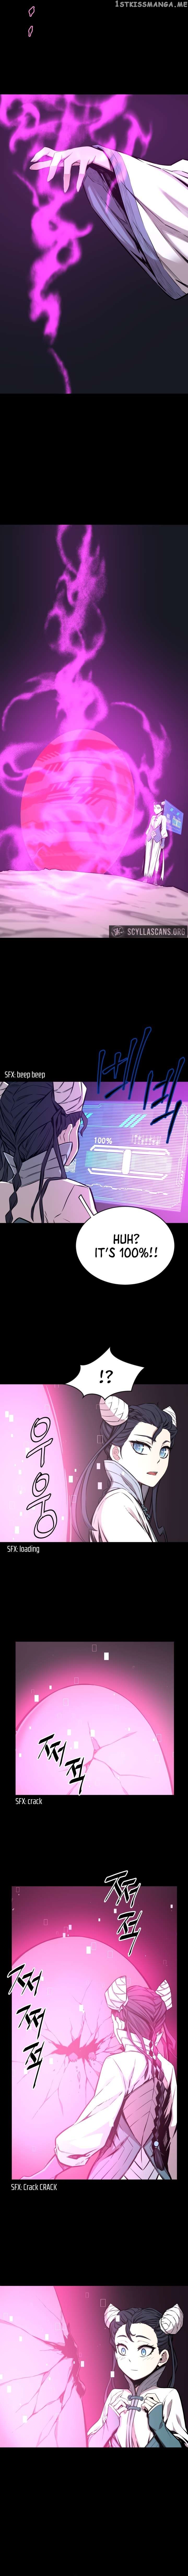 Legend of Mir: Gold Armored Sword Dragon Chapter 44 page 7